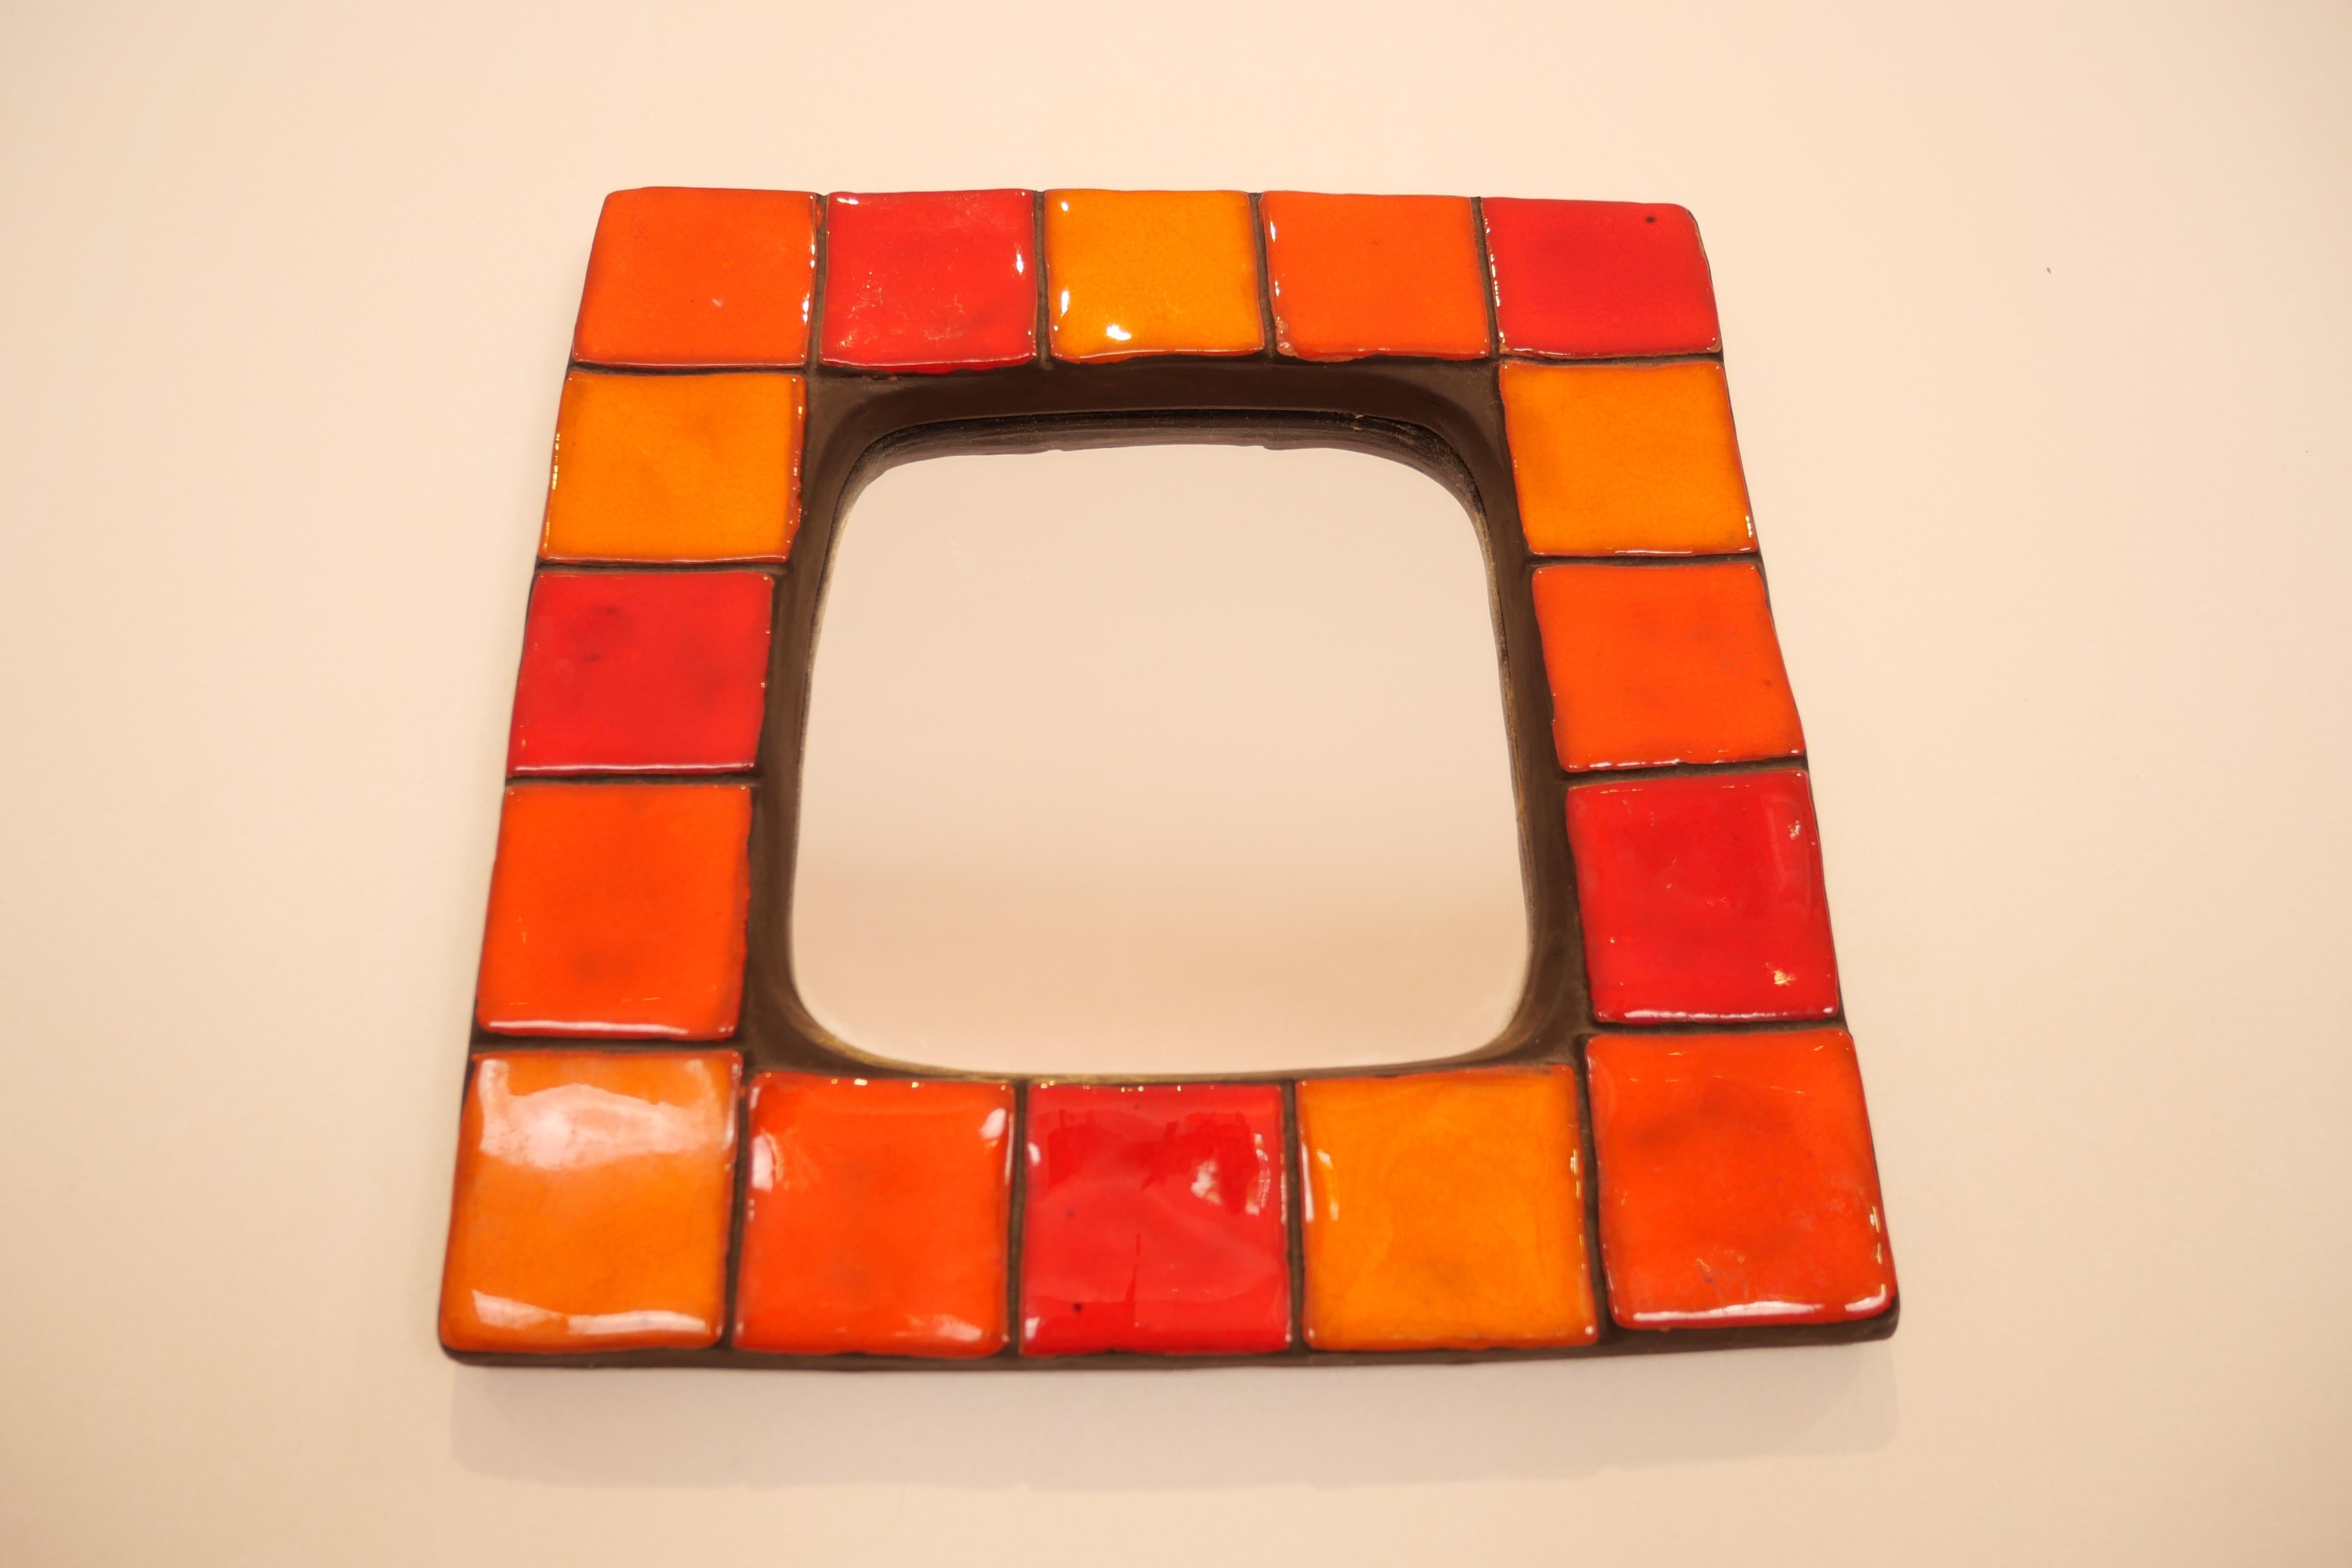 Mithe Espelt square ceramic mirror enameled in various shades of red and orange ceramic, France, 1970s.
In good original condition with felt green backing. 

Mithé Espelt born in 1923 is a French ceramist based in Camargue, South of France. At